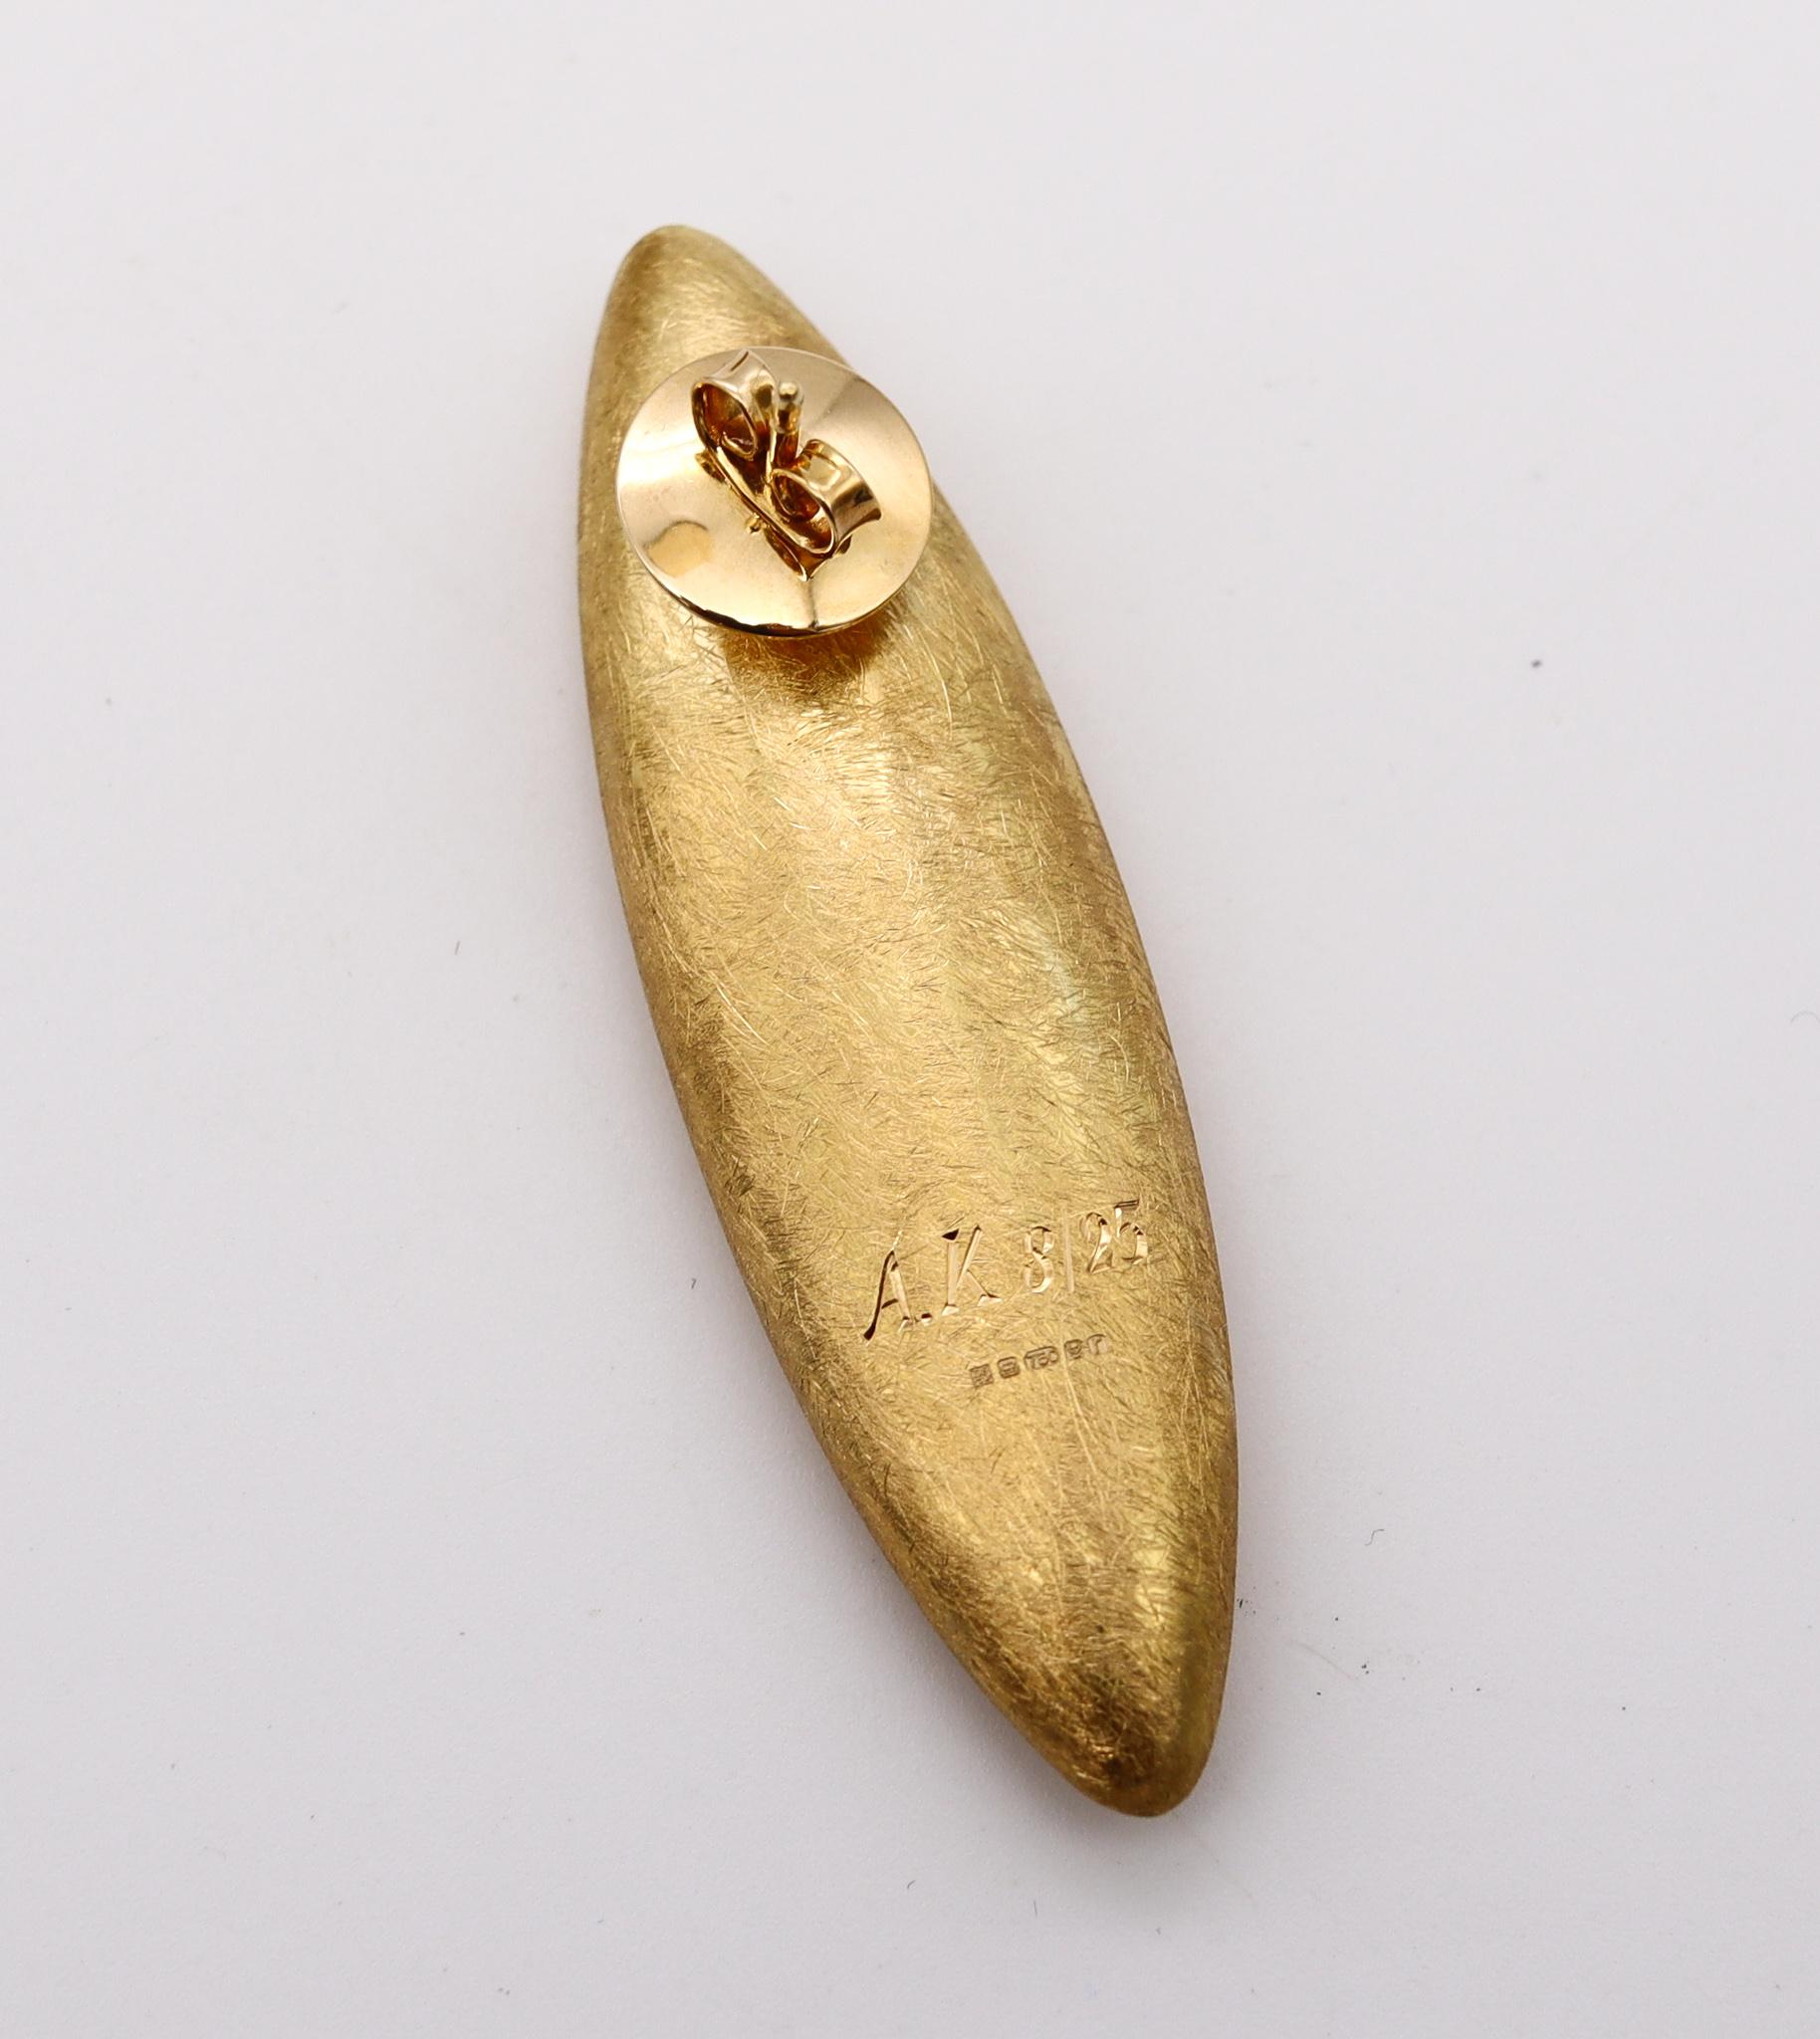 Anish Kapoor 2010 London Rare Pair of Sculptural Torpedo Earrings in 18Kt Gold For Sale 1